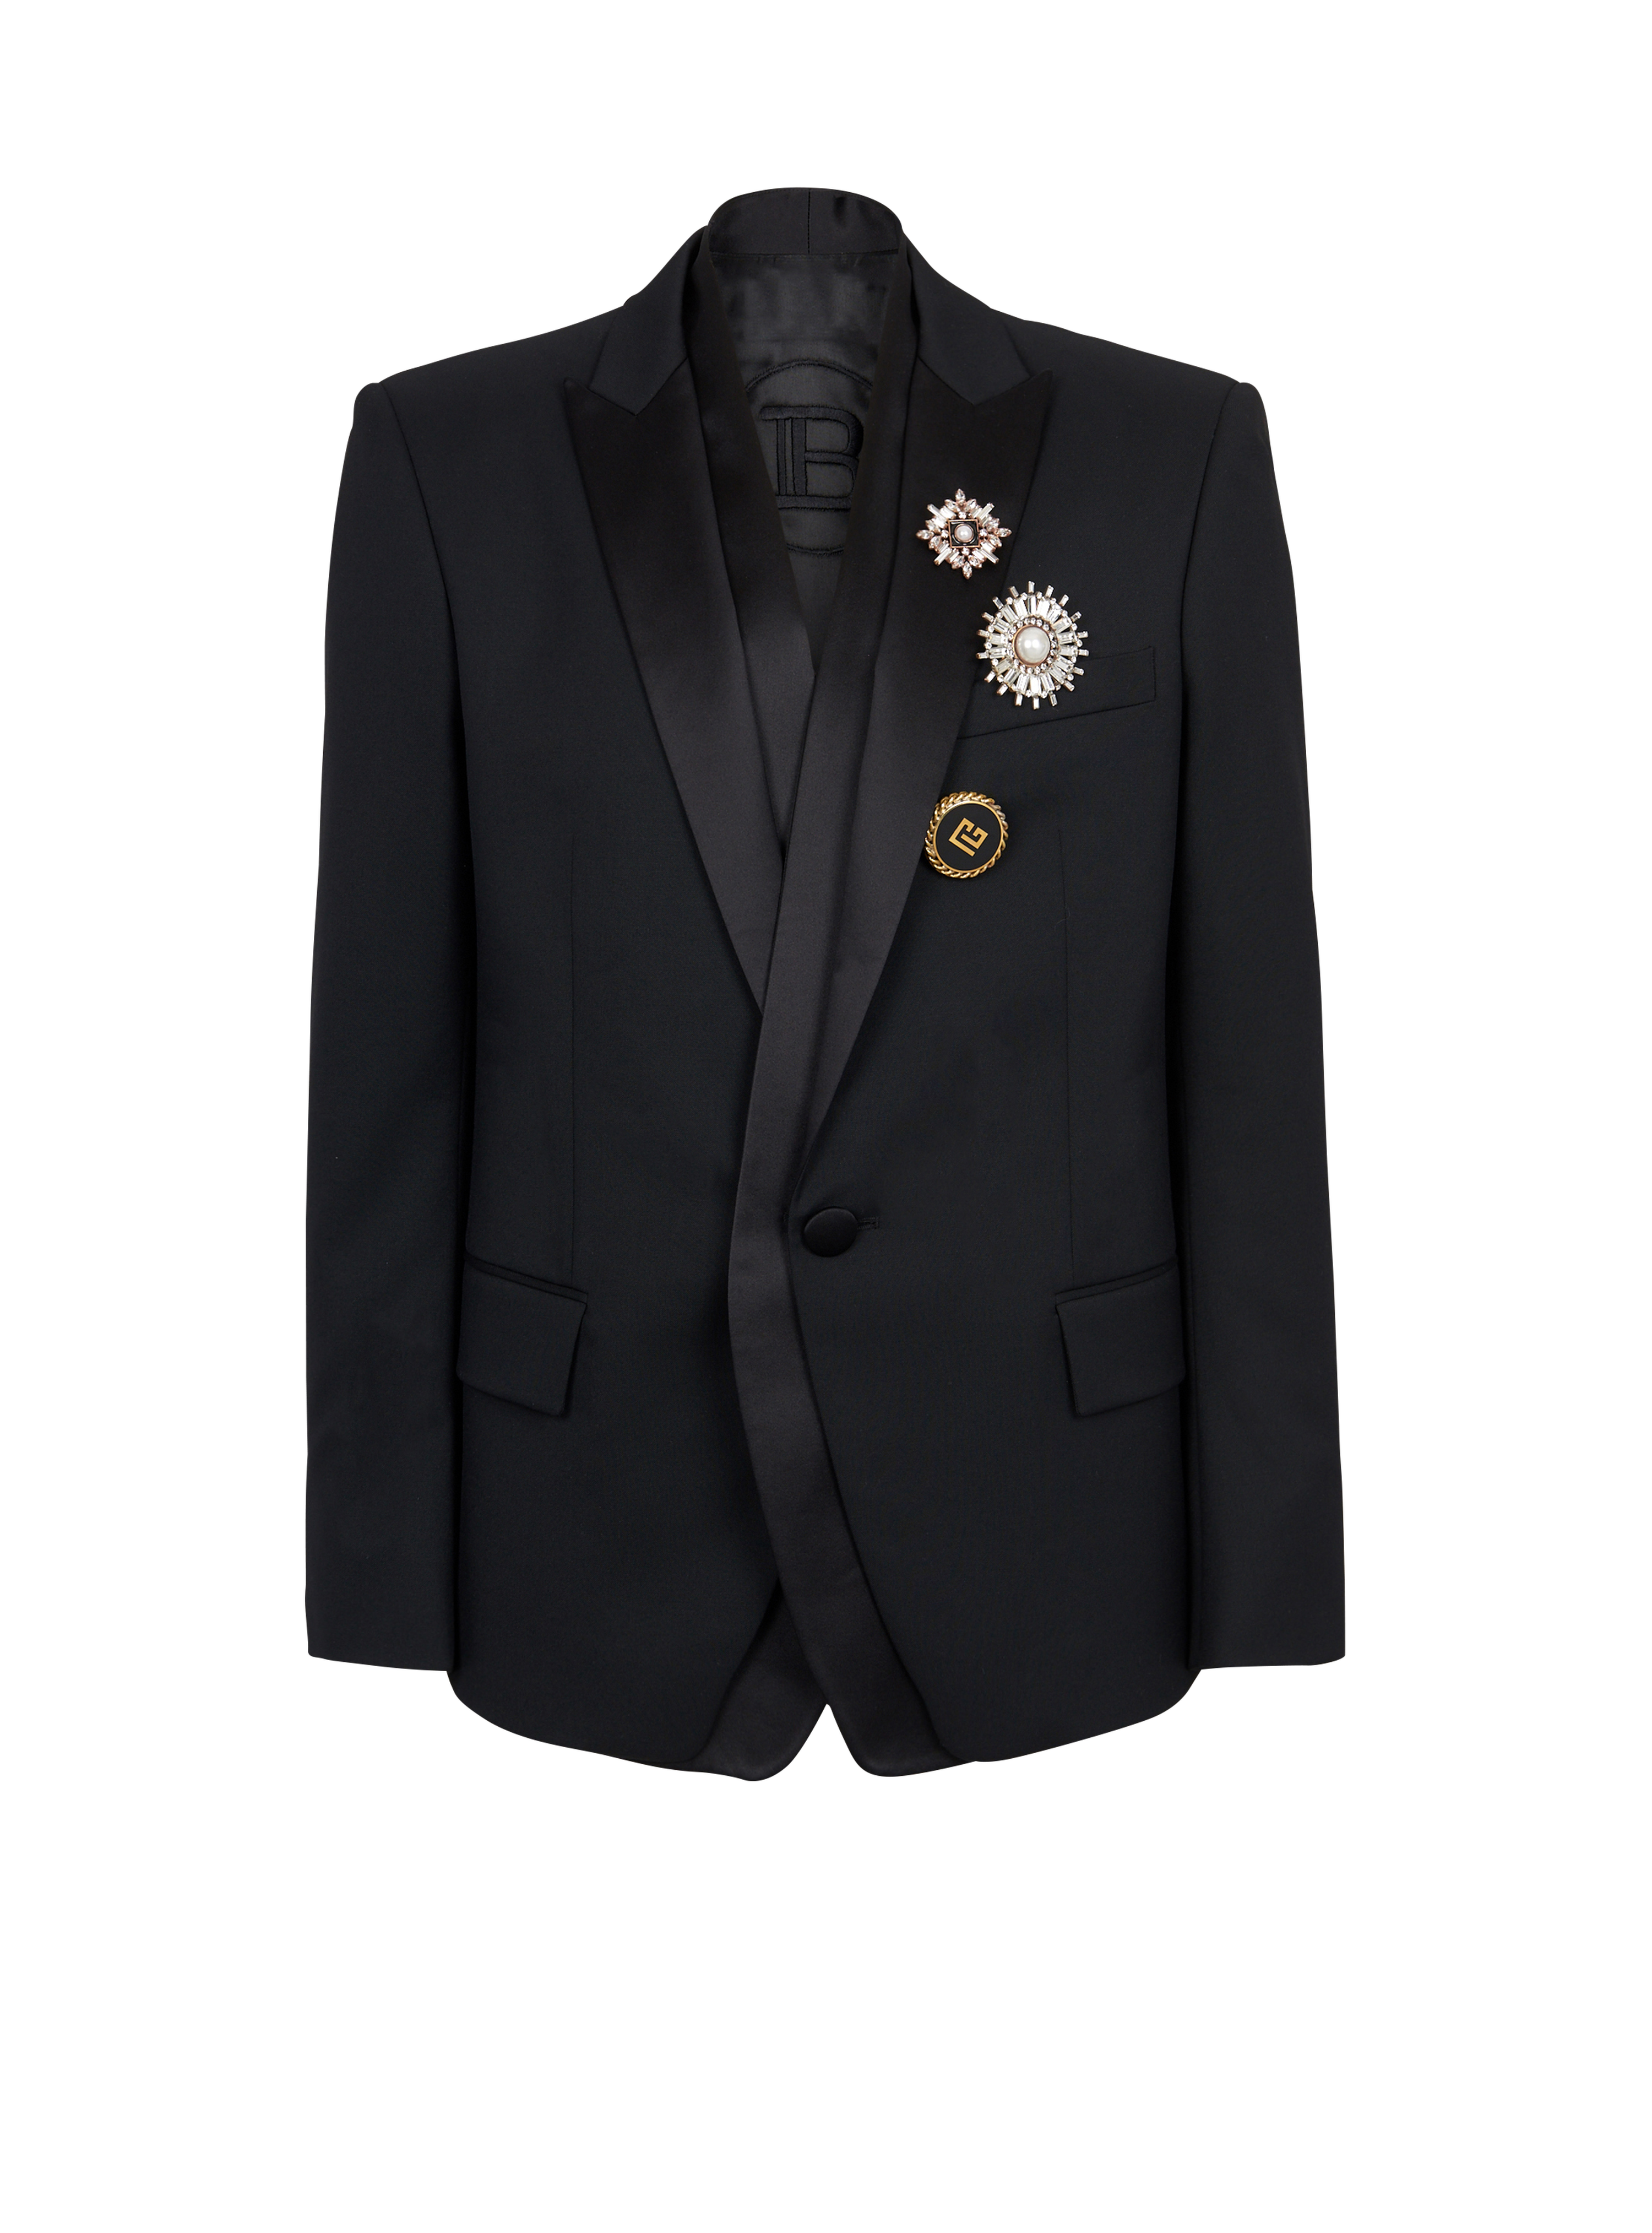 Wool blazer with embroidered badges and satin collar, black